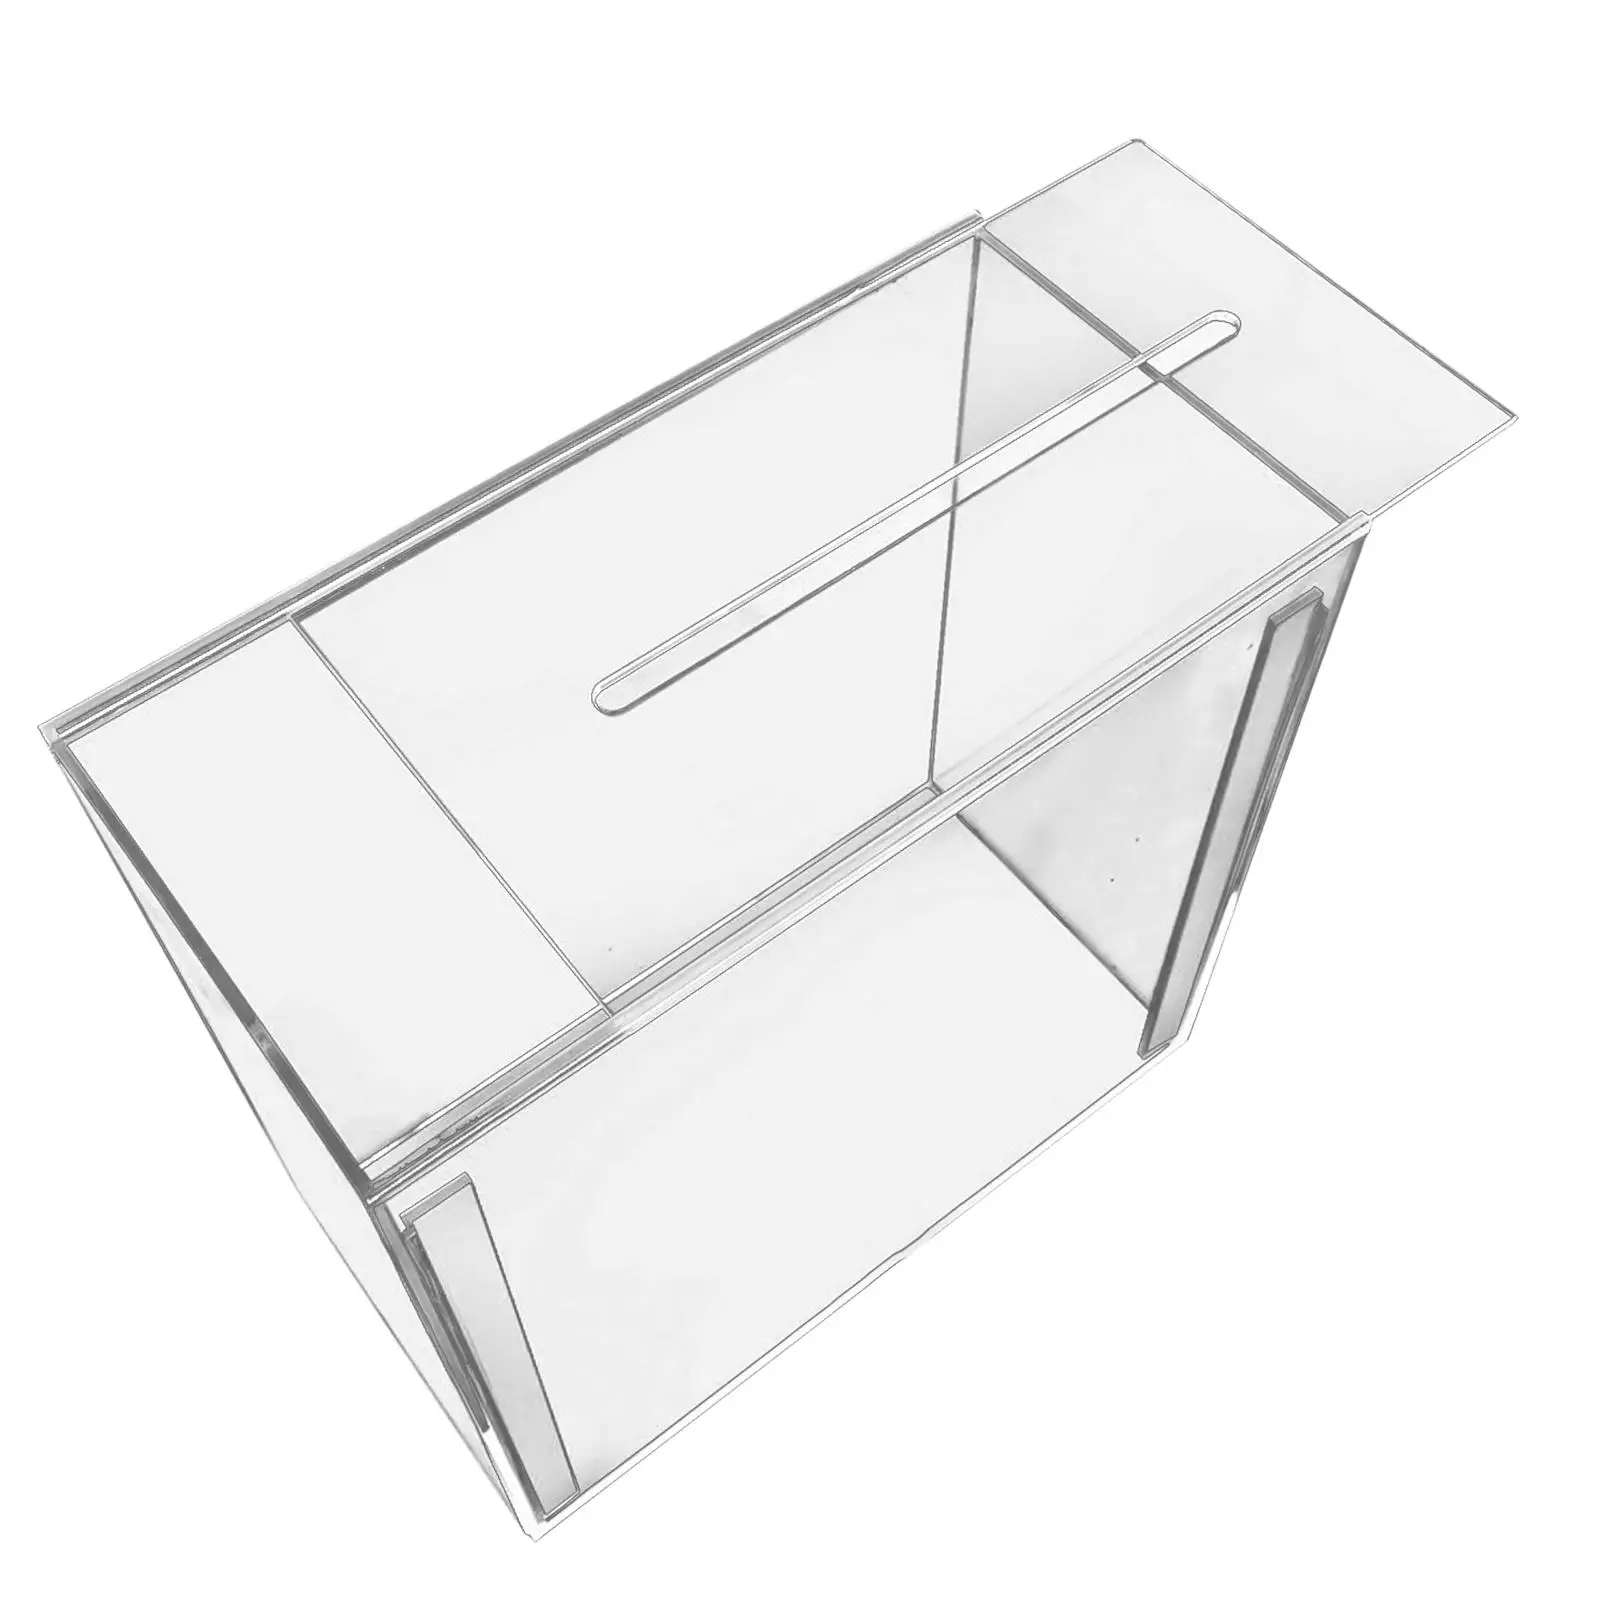 Clear Acrylic Wedding Cards Box with Slot with Slot Gift Box Holder Envelope Card Box for Wedding Reception Ceremony Anniversary